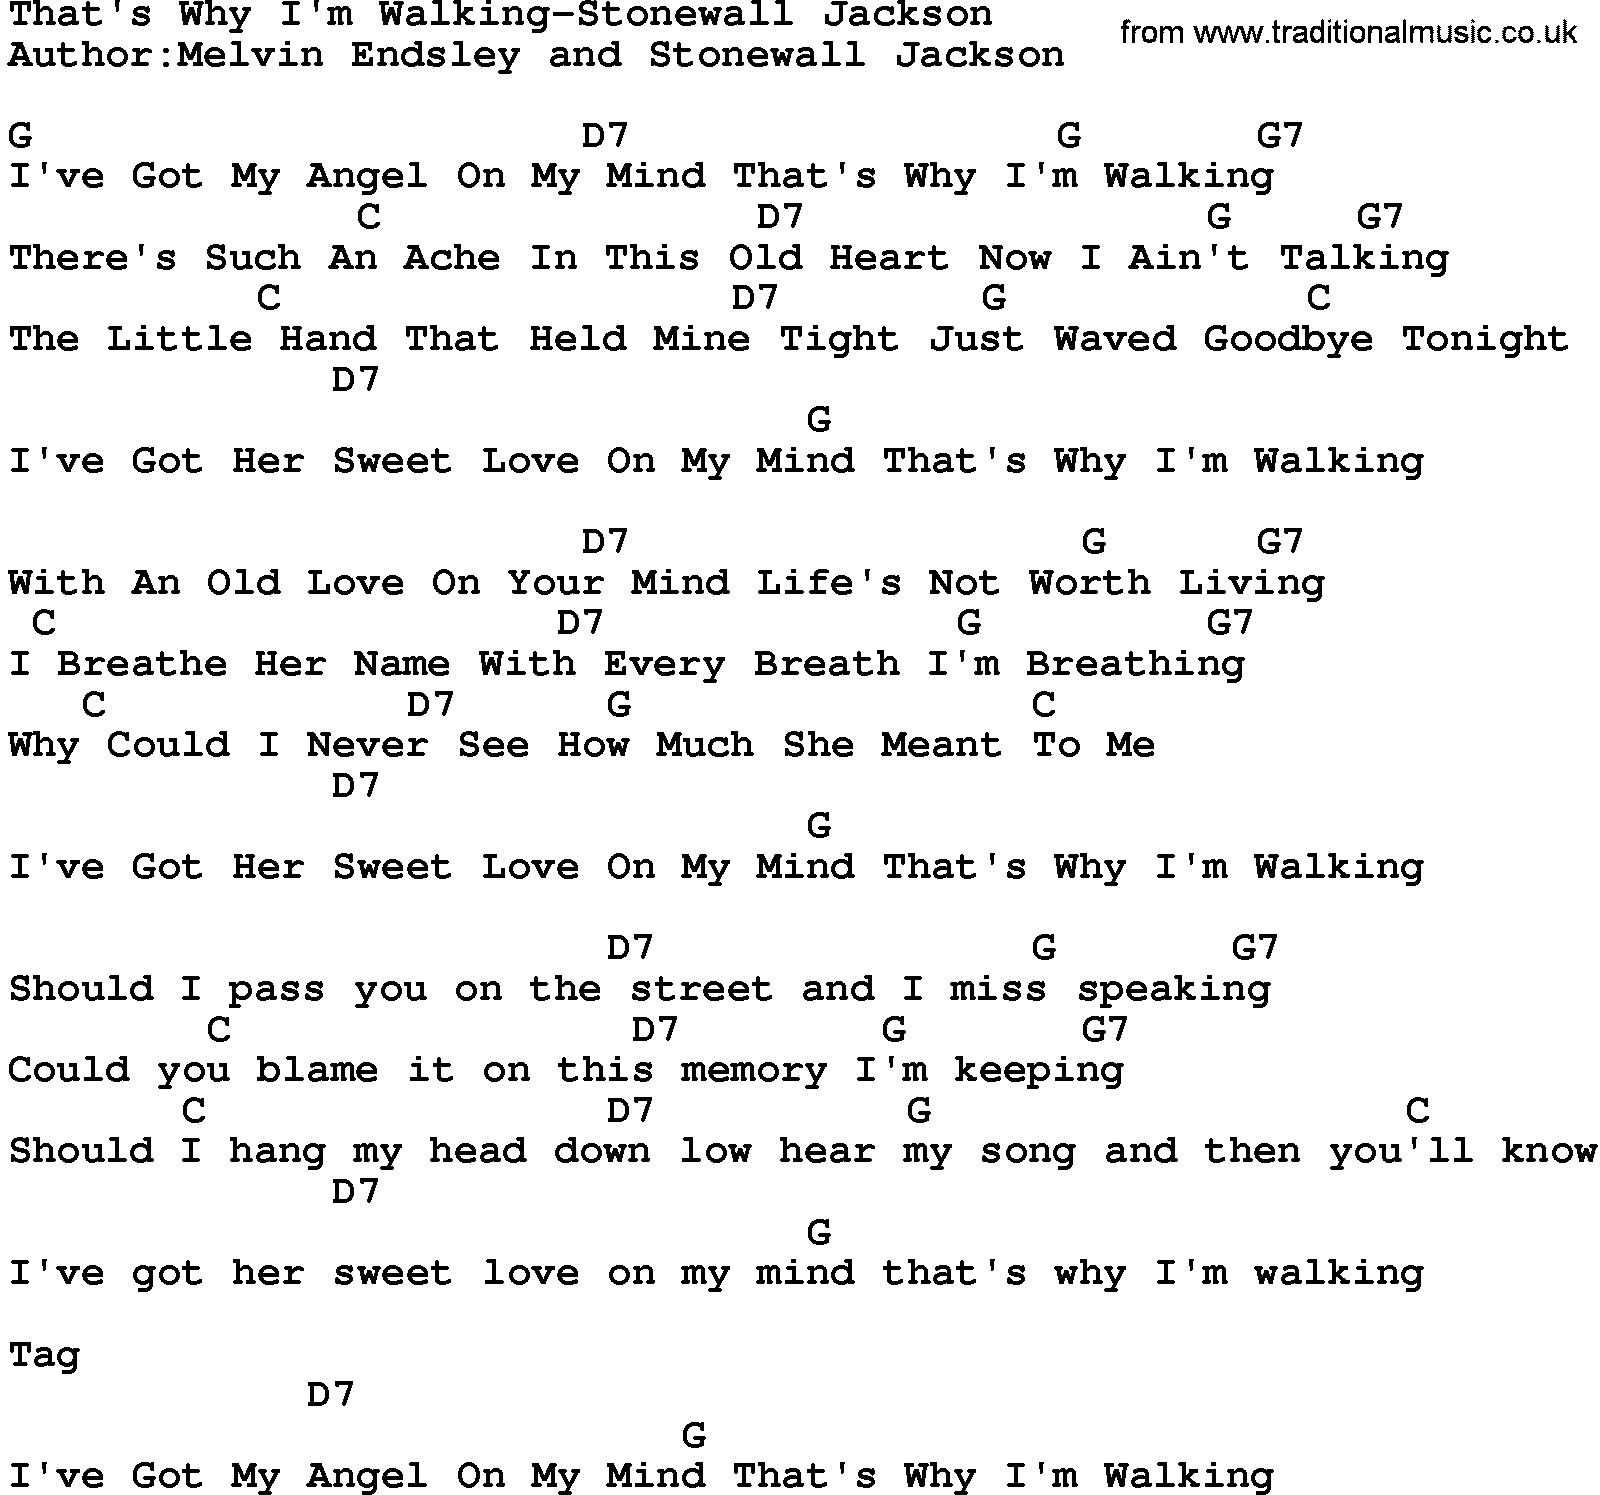 Country music song: That's Why I'm Walking-Stonewall Jackson lyrics and chords